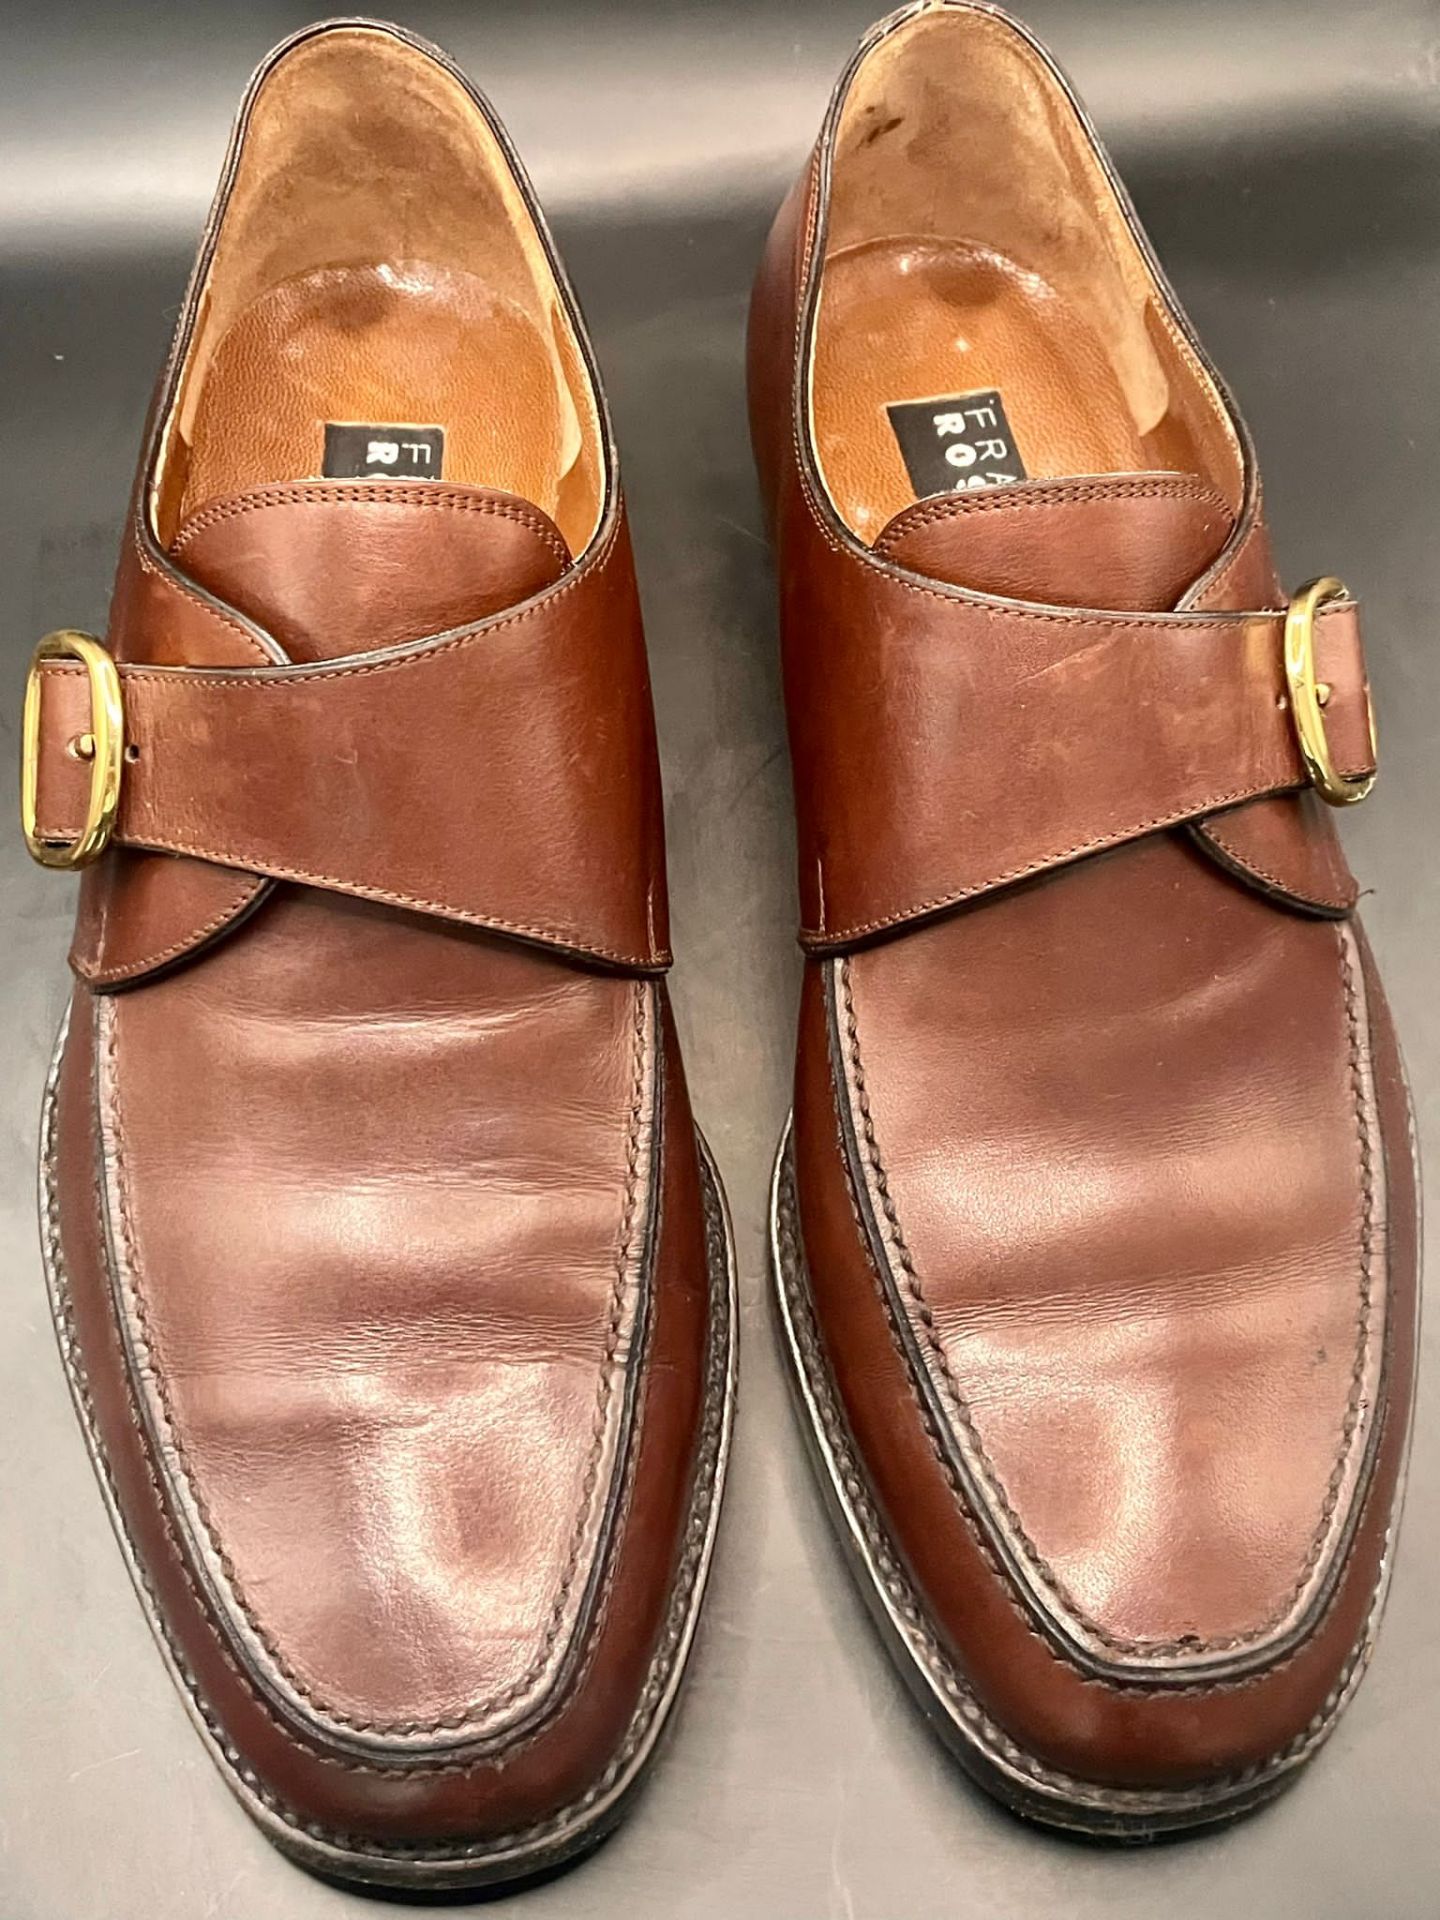 Fratelli Rossetti Monk Strap leather shoes size 7 with good soles. Good condition please see photos  - Image 10 of 14